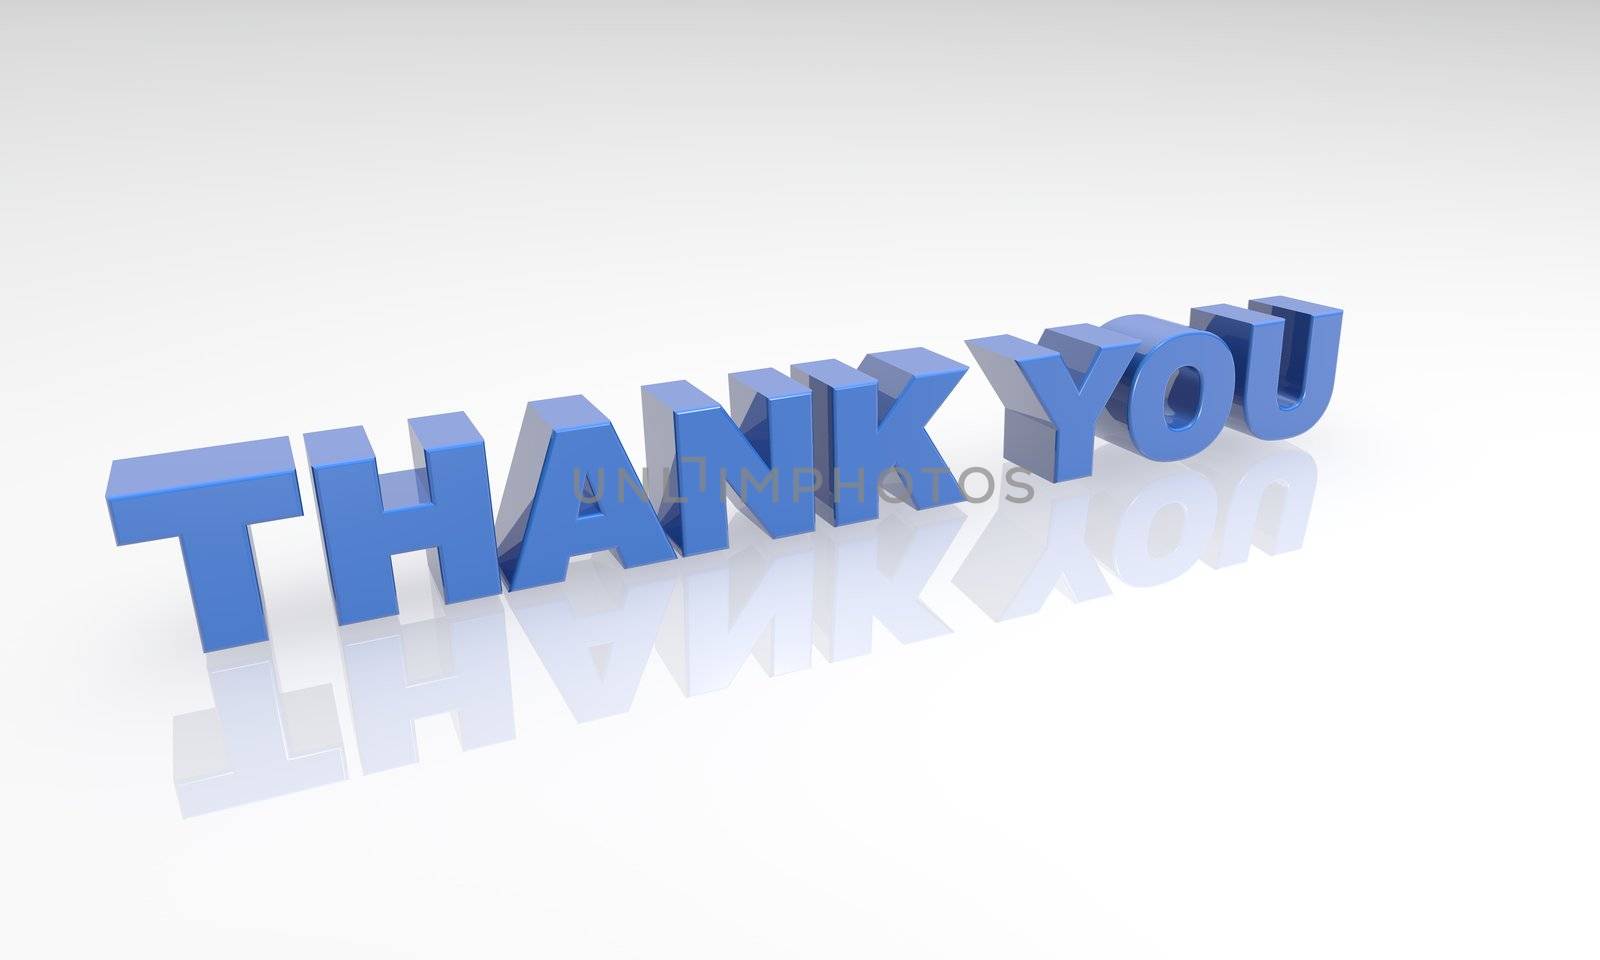 blue thank you 3d letters on a white background with a white reflection.